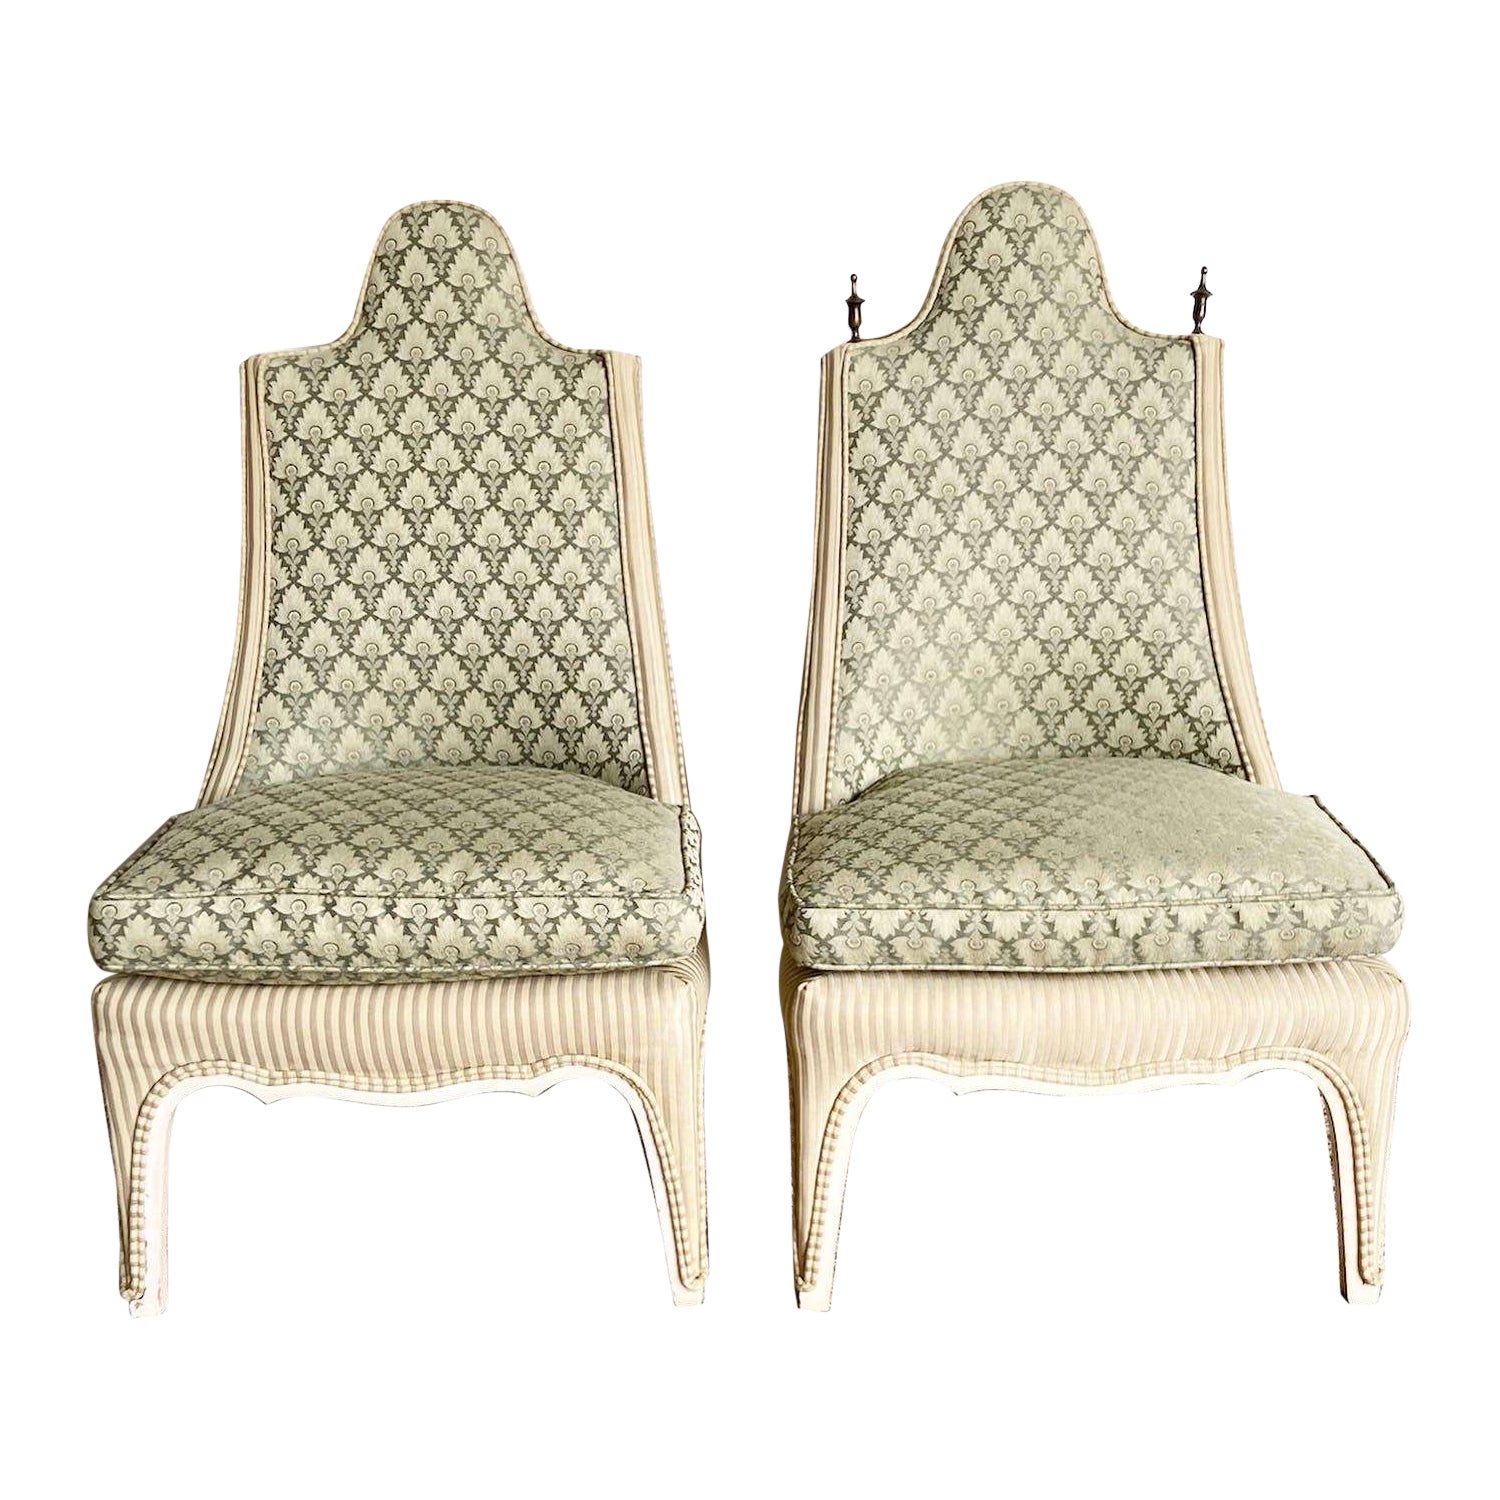 Regency Green and Tan Accent Chairs - a Pair For Sale